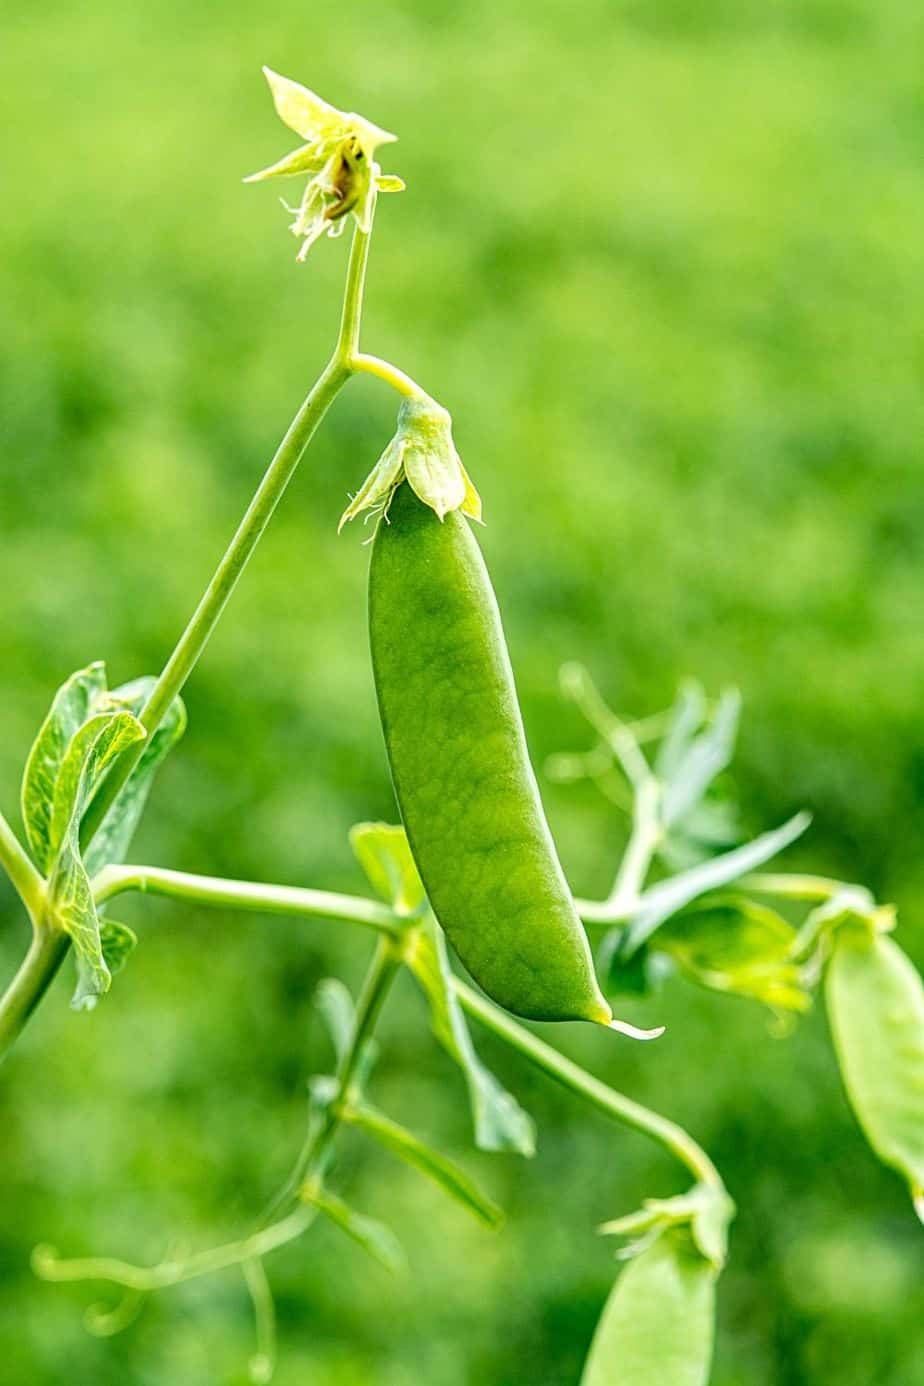 Another vegetable you can grow in a pot in an east-facing garden are Green Peas